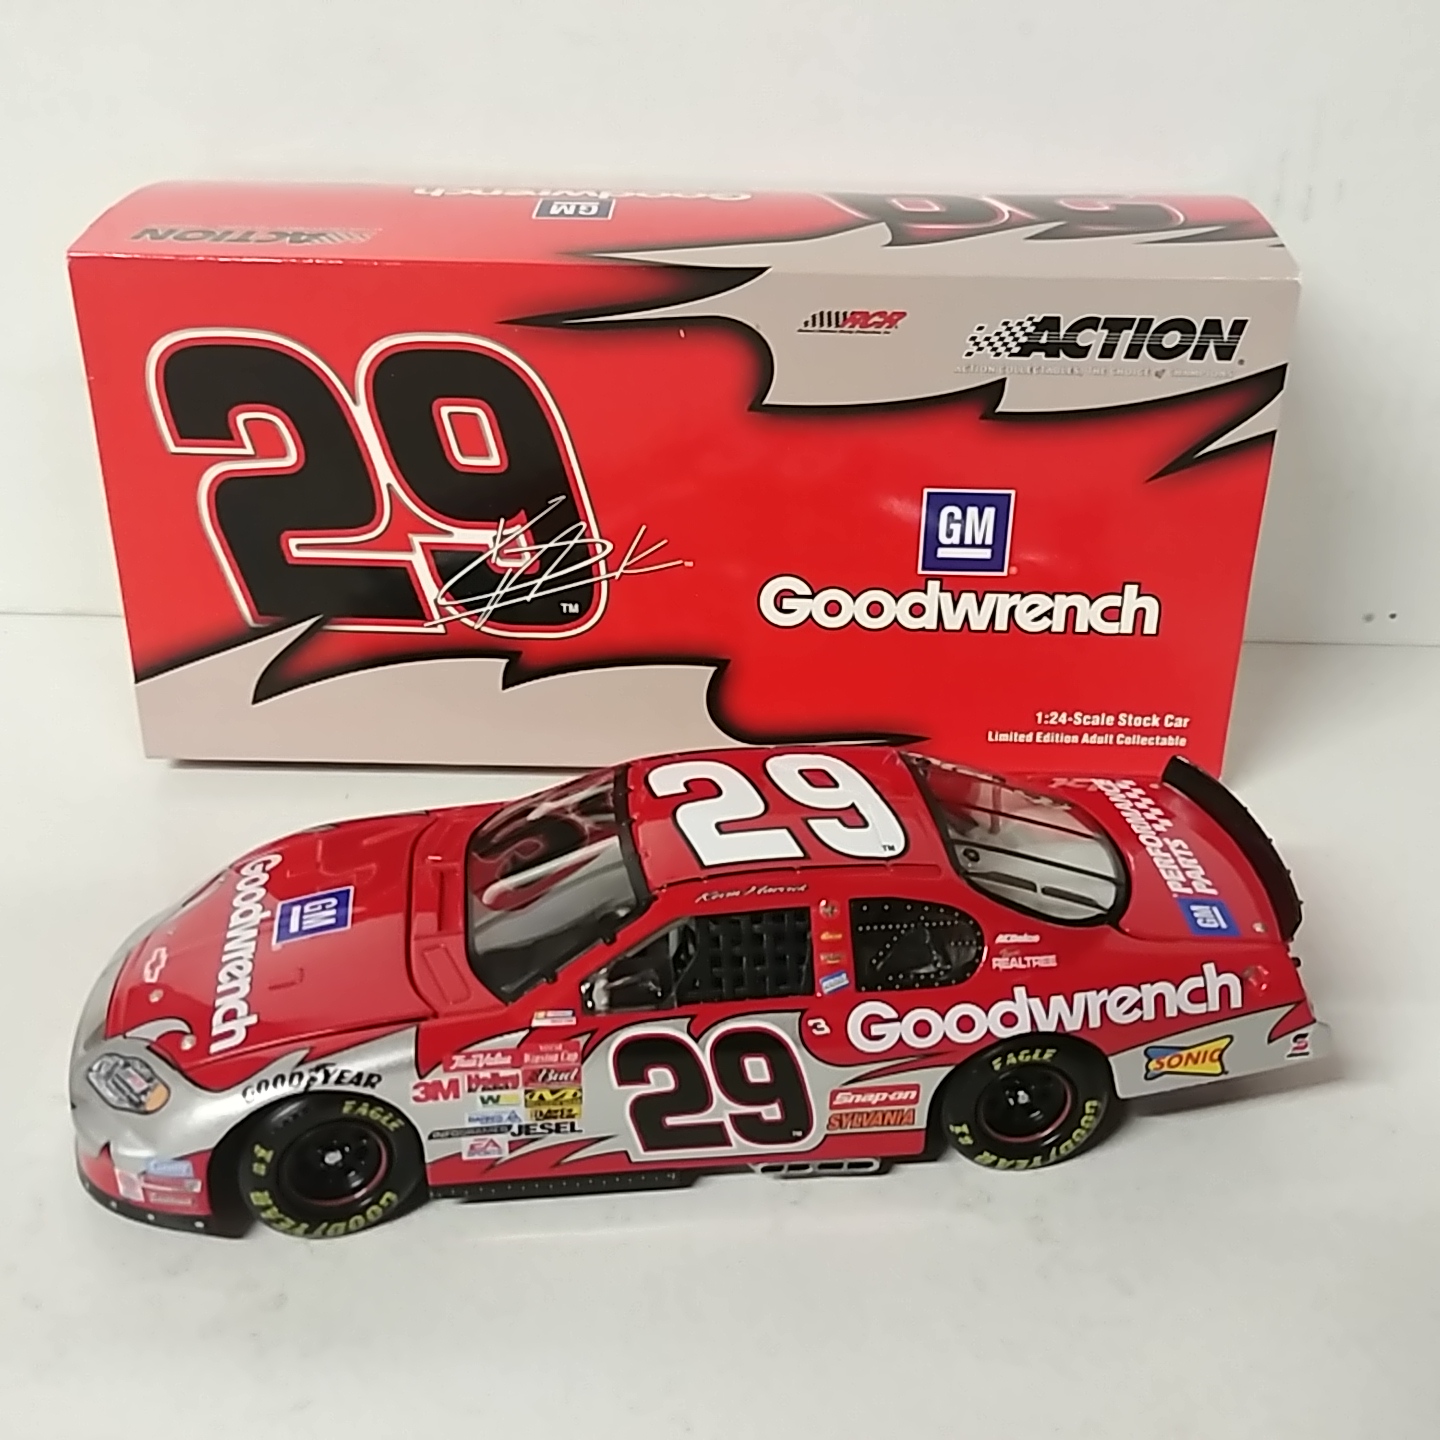 2003 Kevin Harvick 1/24th GM Goodwrench "Bud Shootout" c/w car